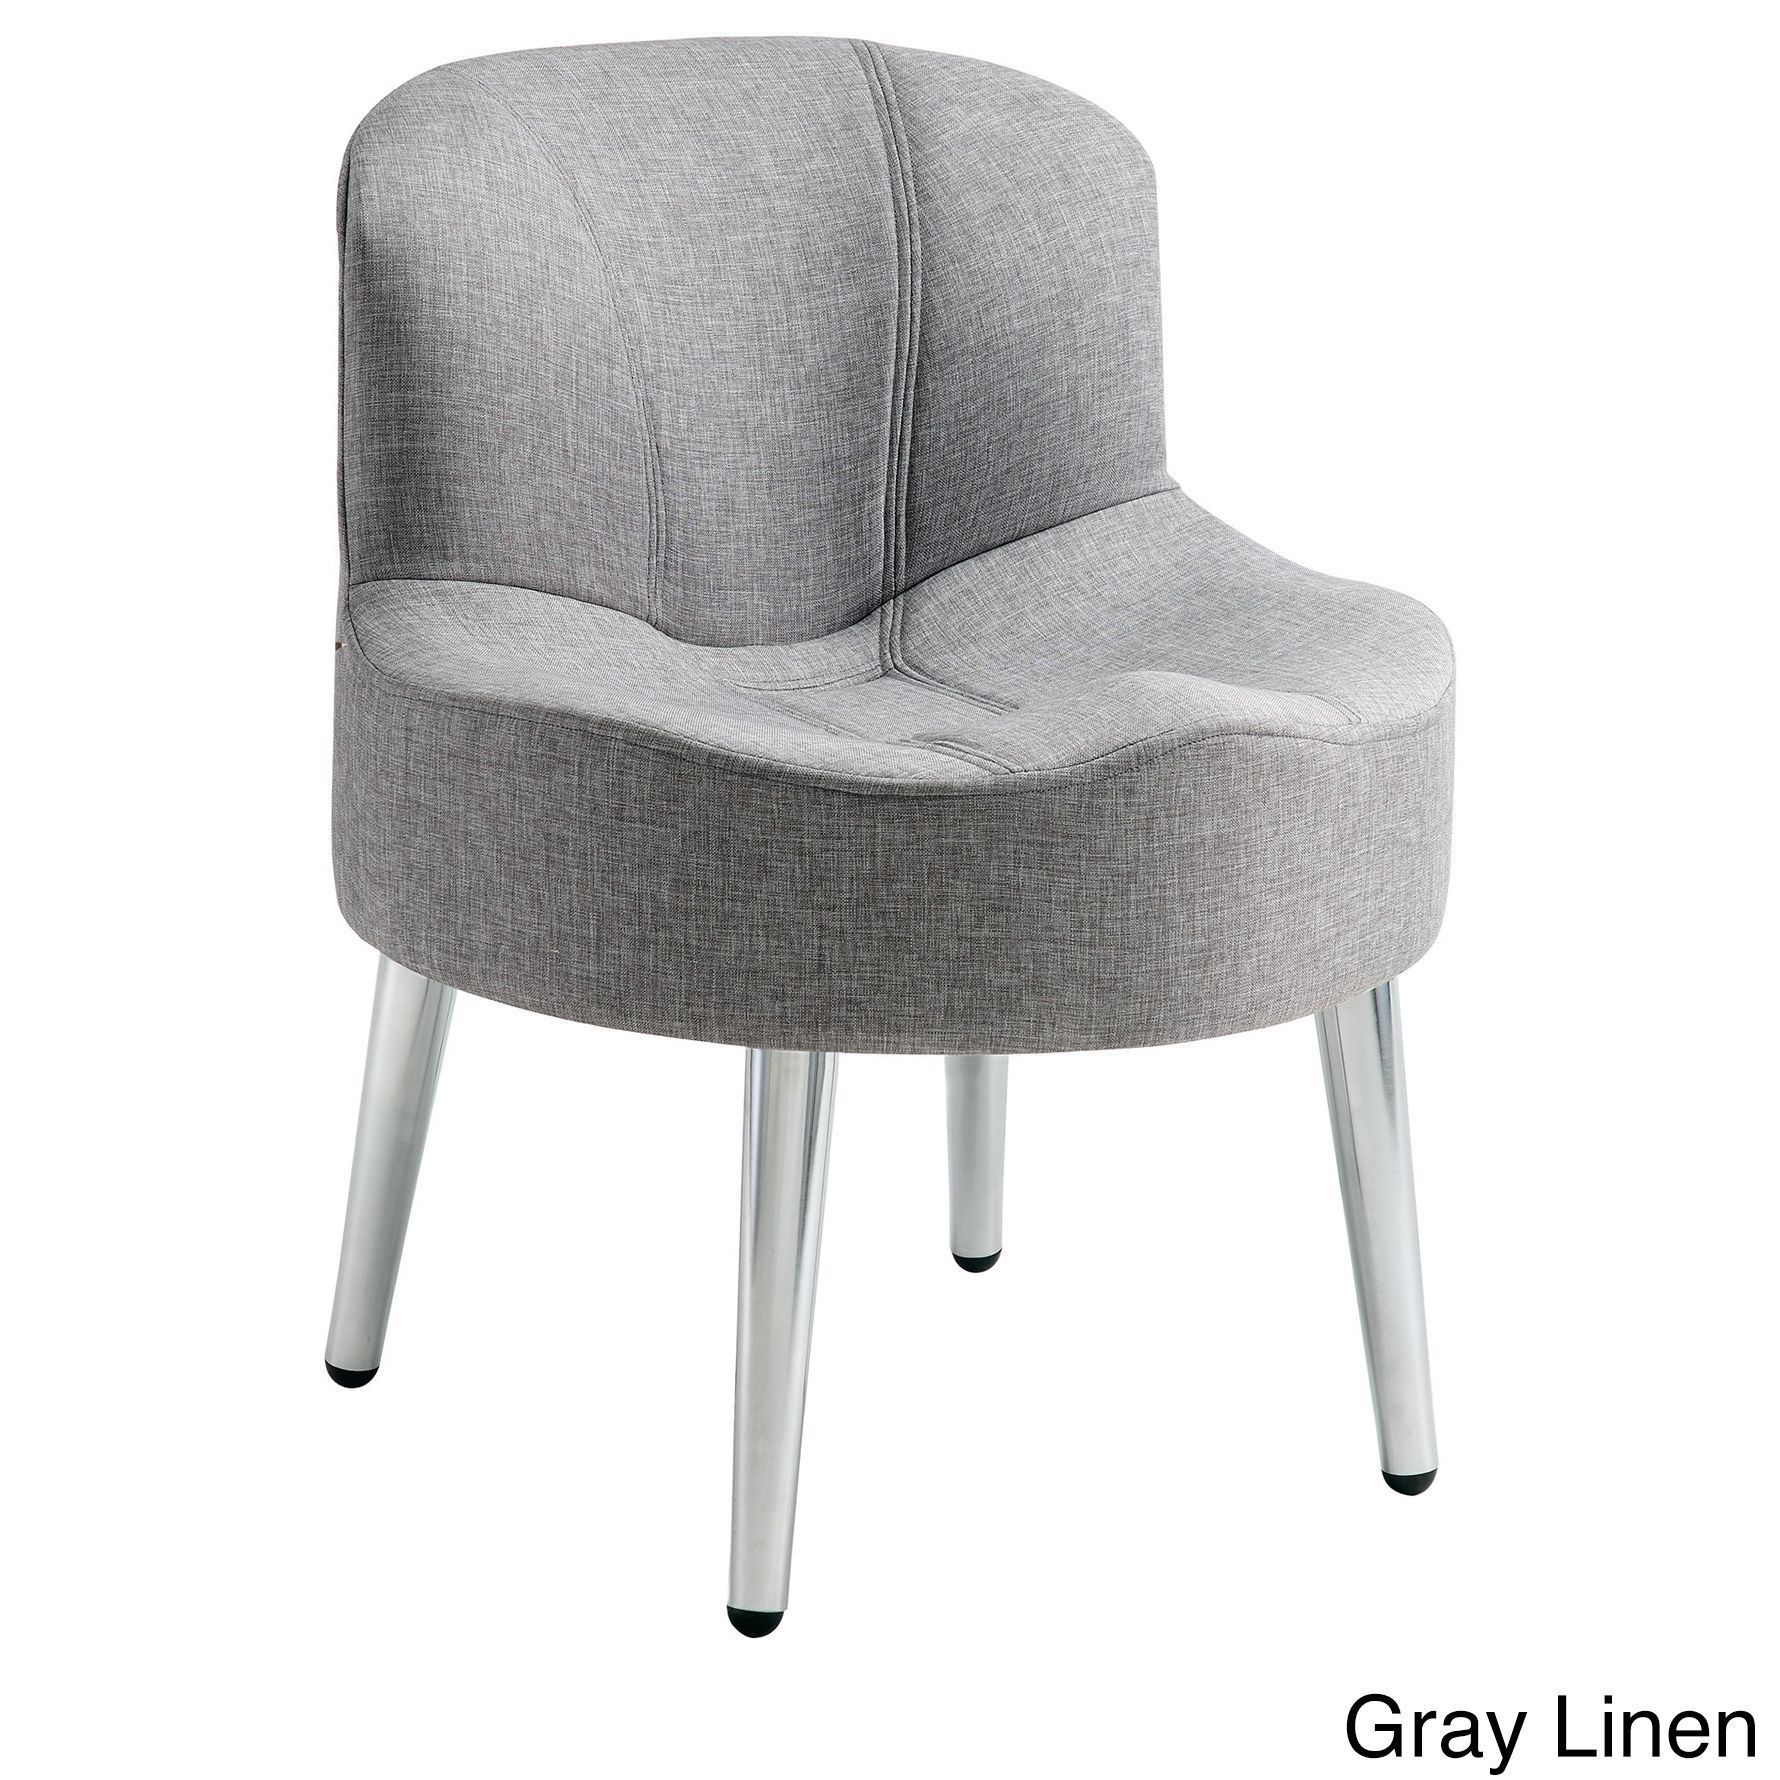 Featured Photo of Chill Swivel Chairs With Metal Base